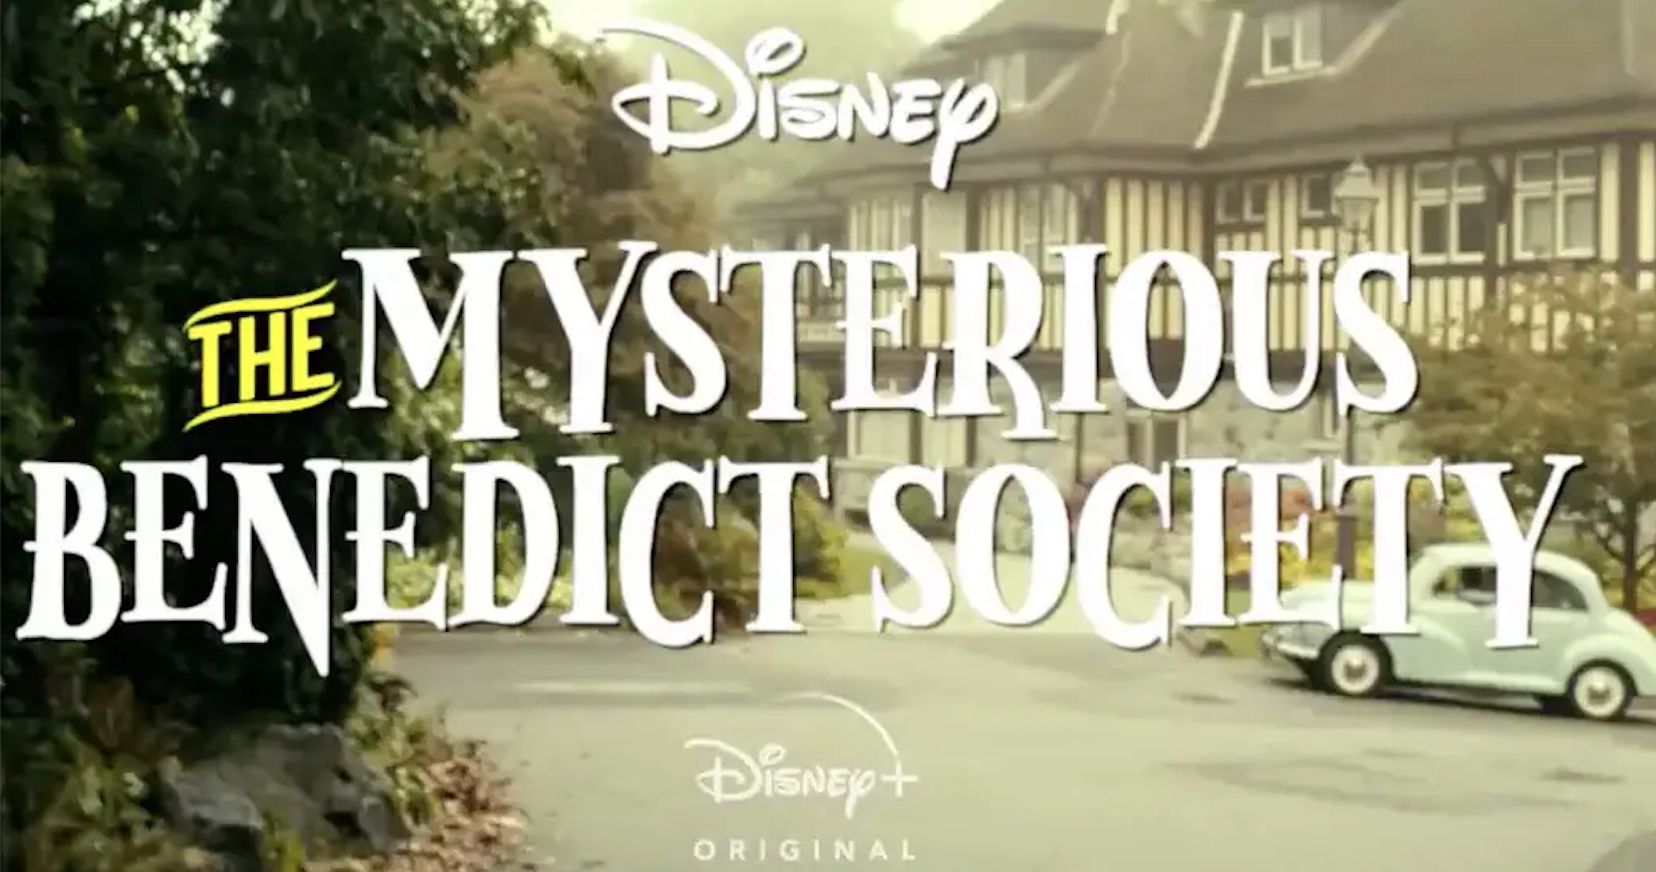 The Mysterious Benedict Society Is Coming to Disney+ in Summer 2021